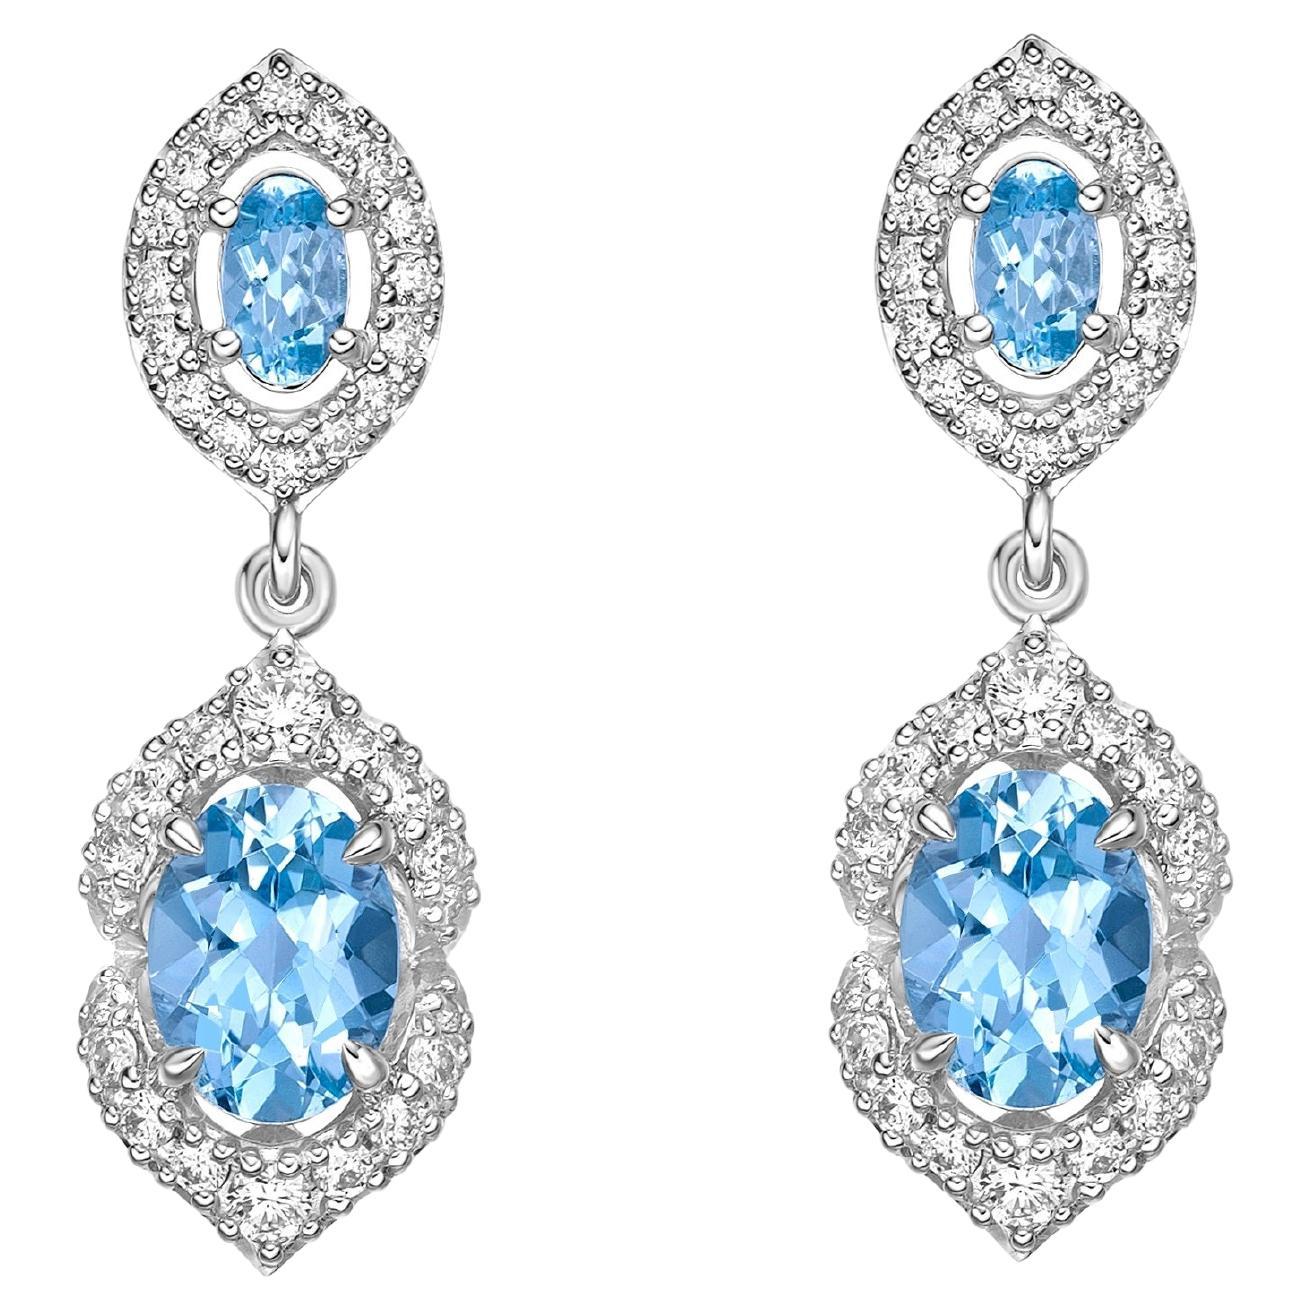 2.29 Carat Aquamarine Drop Earrings in 18Karat White Gold with White Diamond. For Sale